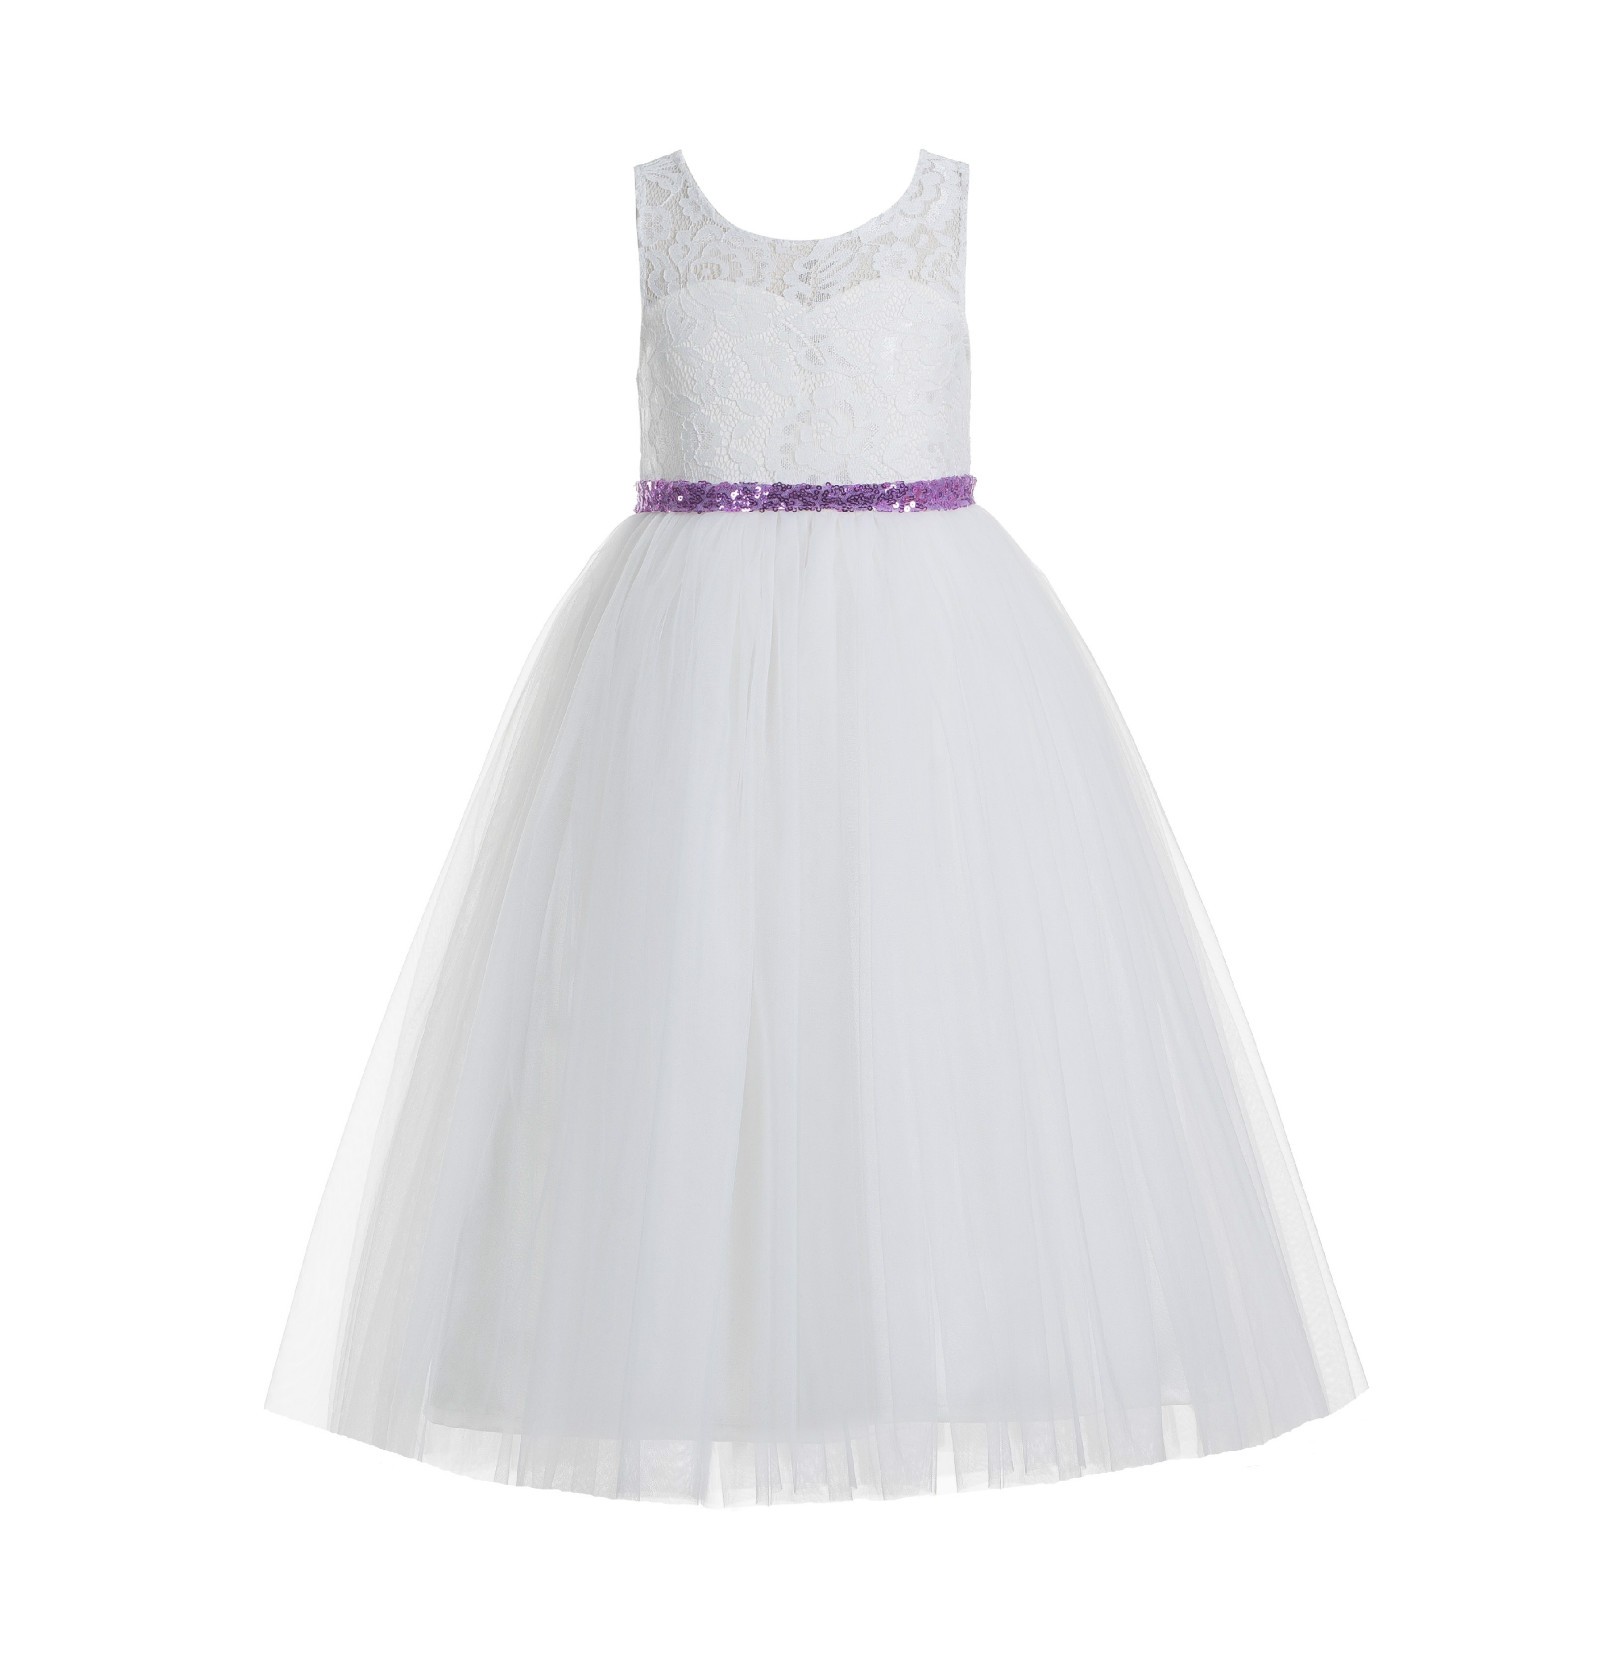 Ivory / Lilac Lace Tulle Scoop Neck Keyhole Back A-line Flower Girl Dress 178